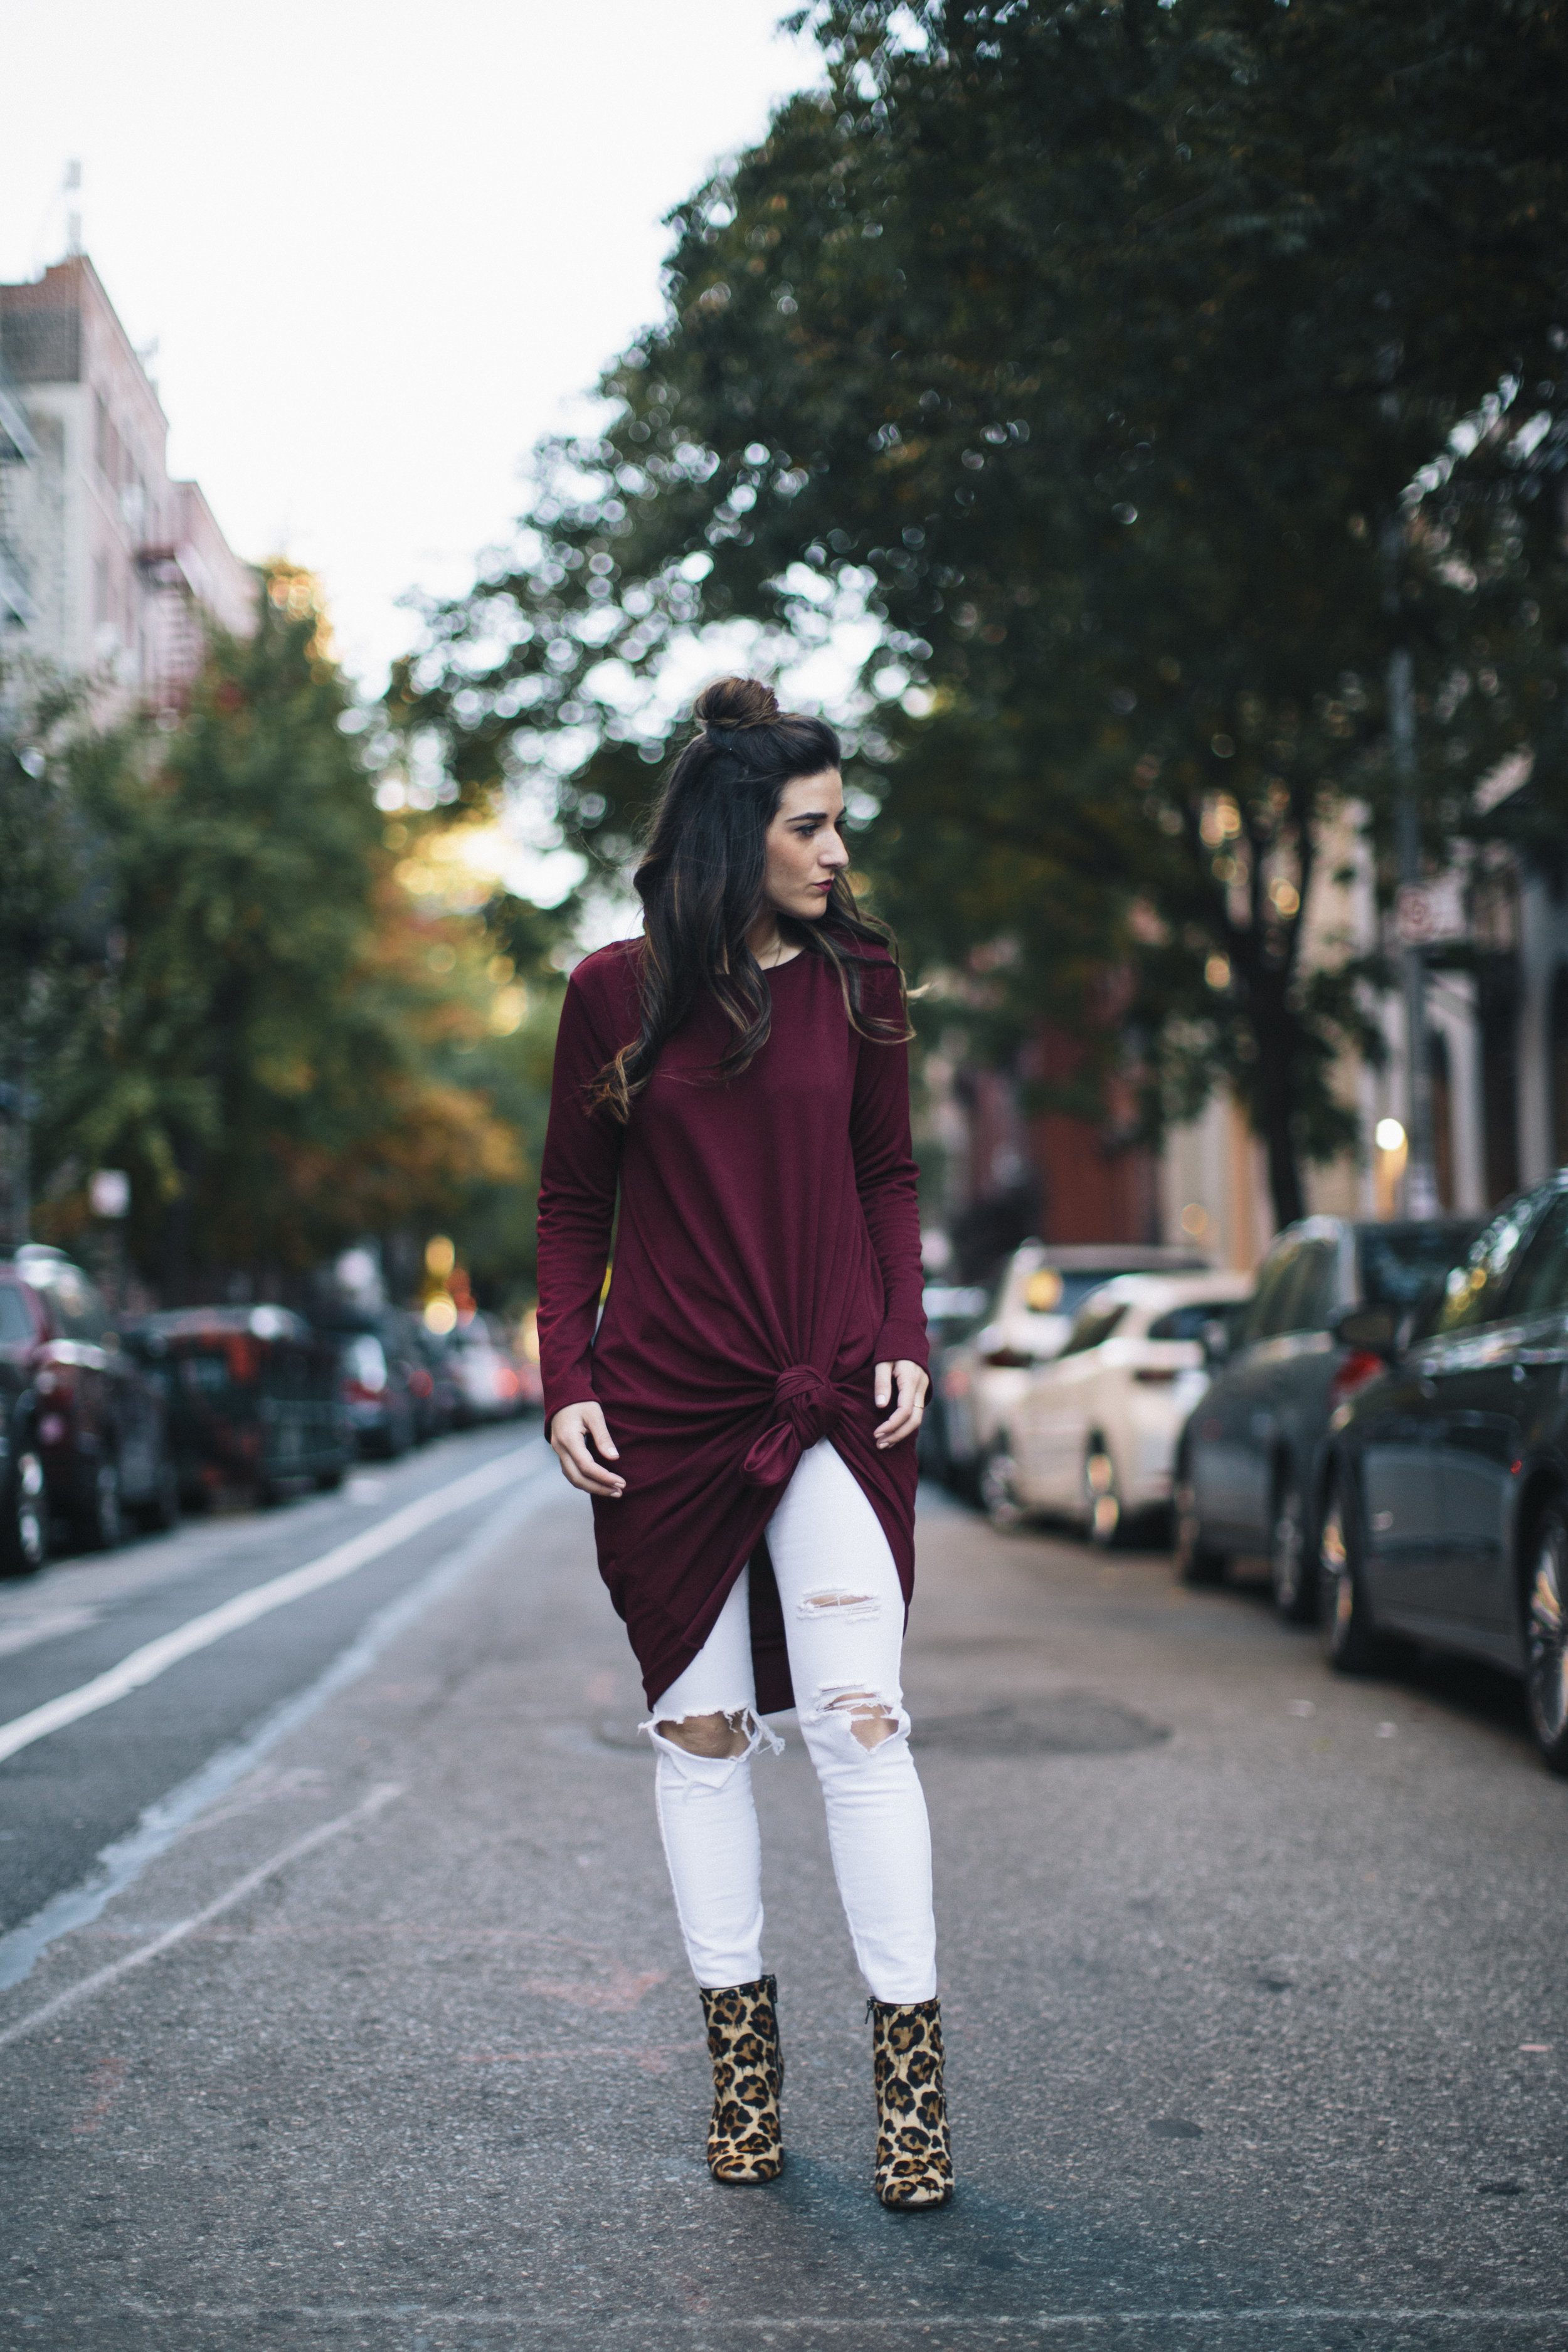 Knotted Dress + Ripped White Jeans 4 Ways To Build Connections Louboutins & Love Fashion Blog Esther Santer NYC Street Style Blogger Outfit OOTD Trendy Red Maroon Burgundy Winter Color Leopard Coach Shoes Booties Pants Girl Women Topknot Bun Hair Wear.jpg